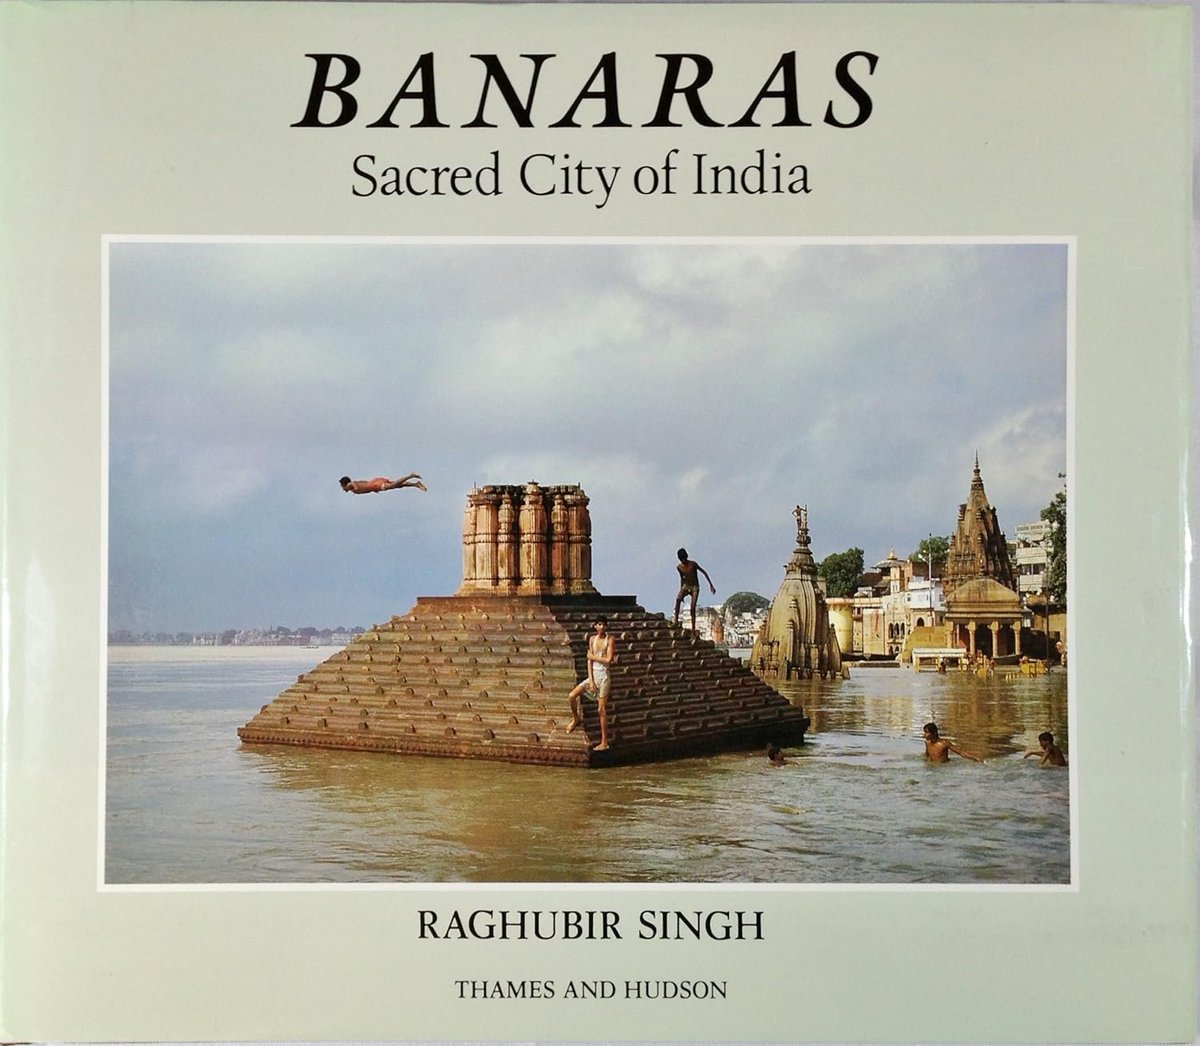 This temple and it's environs,as photographed in 1985 by Raghubir Singh(who happened to be a descendant of the builder of this temple).

It was the cover of his 'Banaras: Sacred City of India' photobook published in 1987.